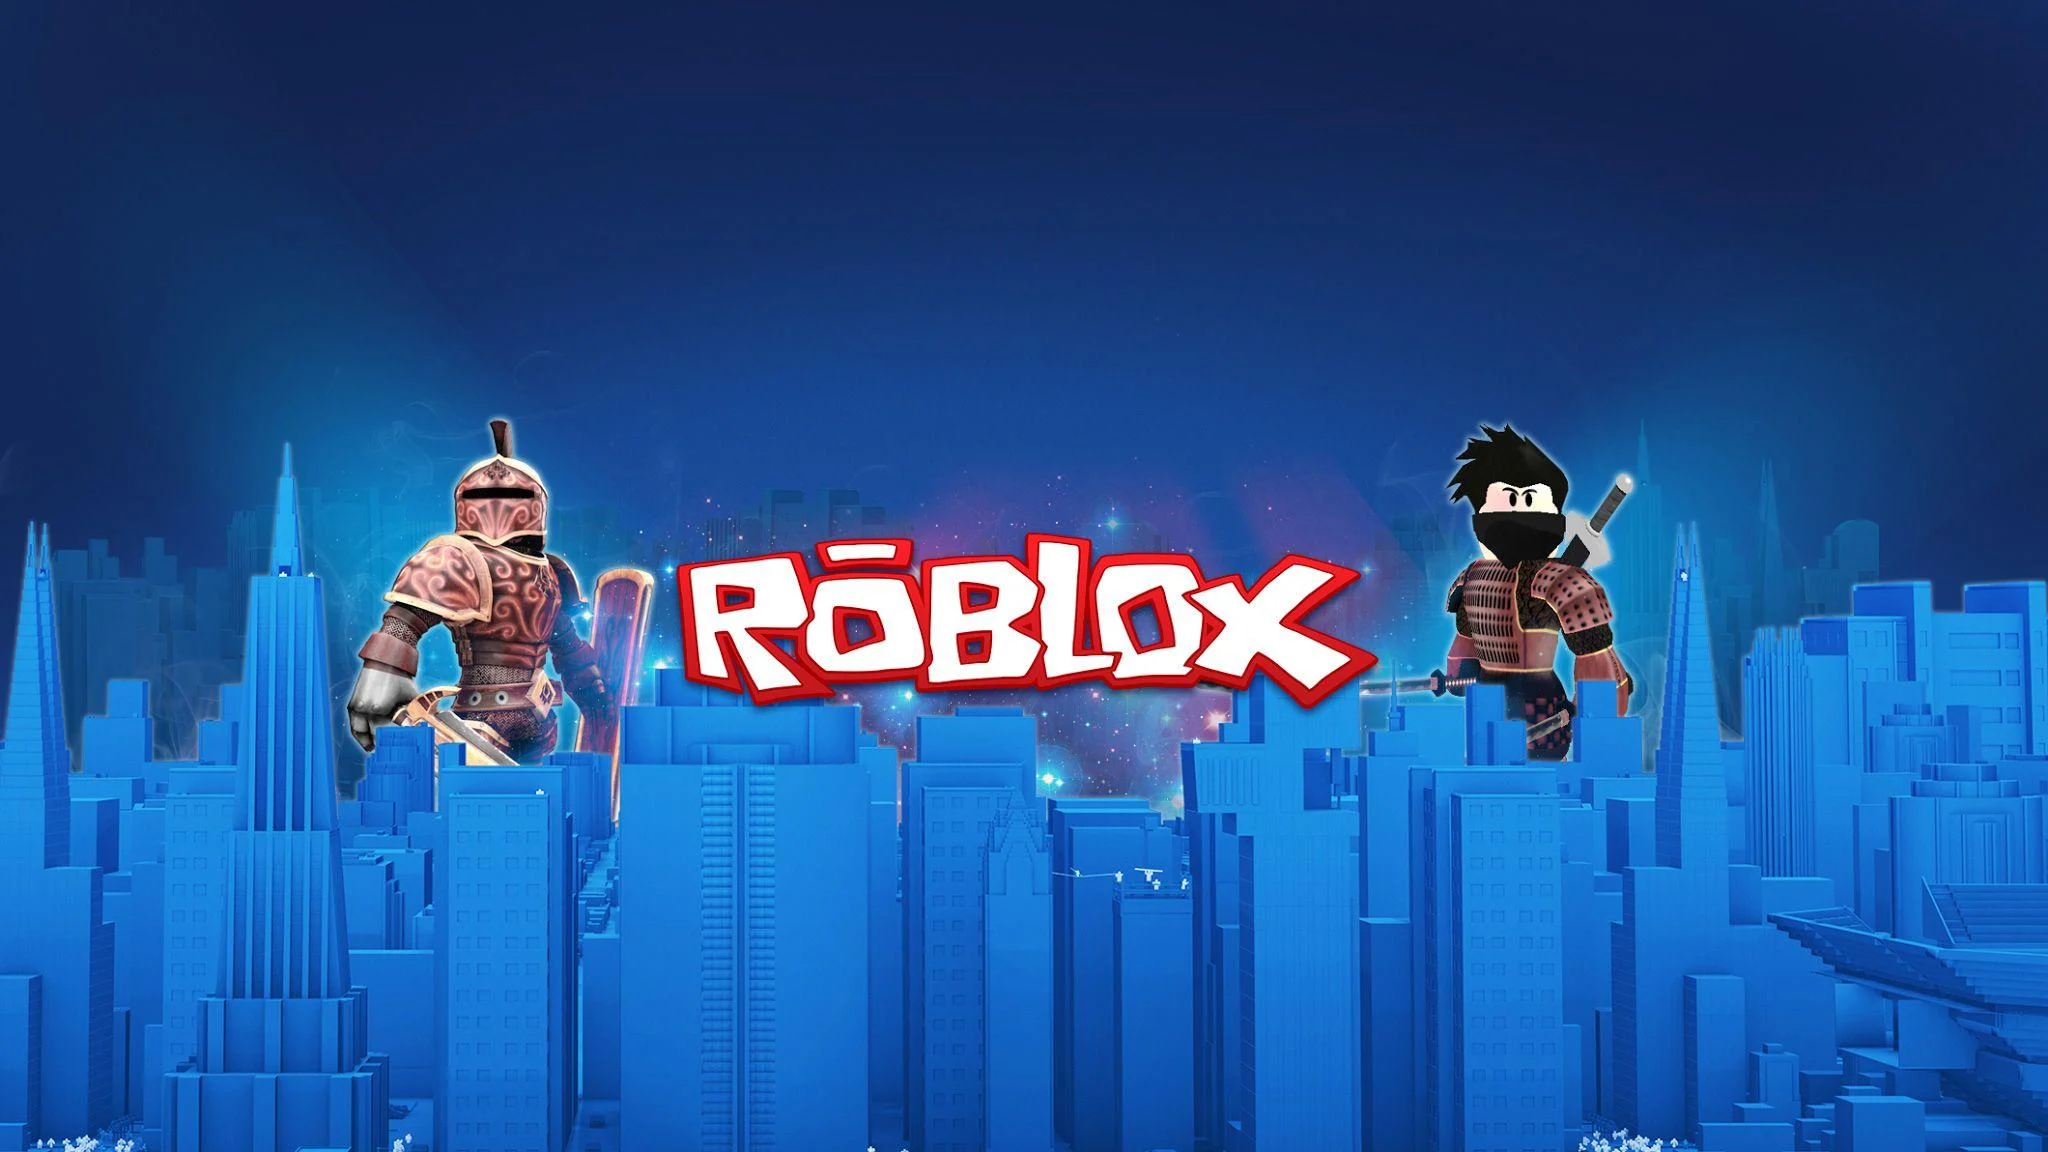 Intense battles in this action-packed Roblox game